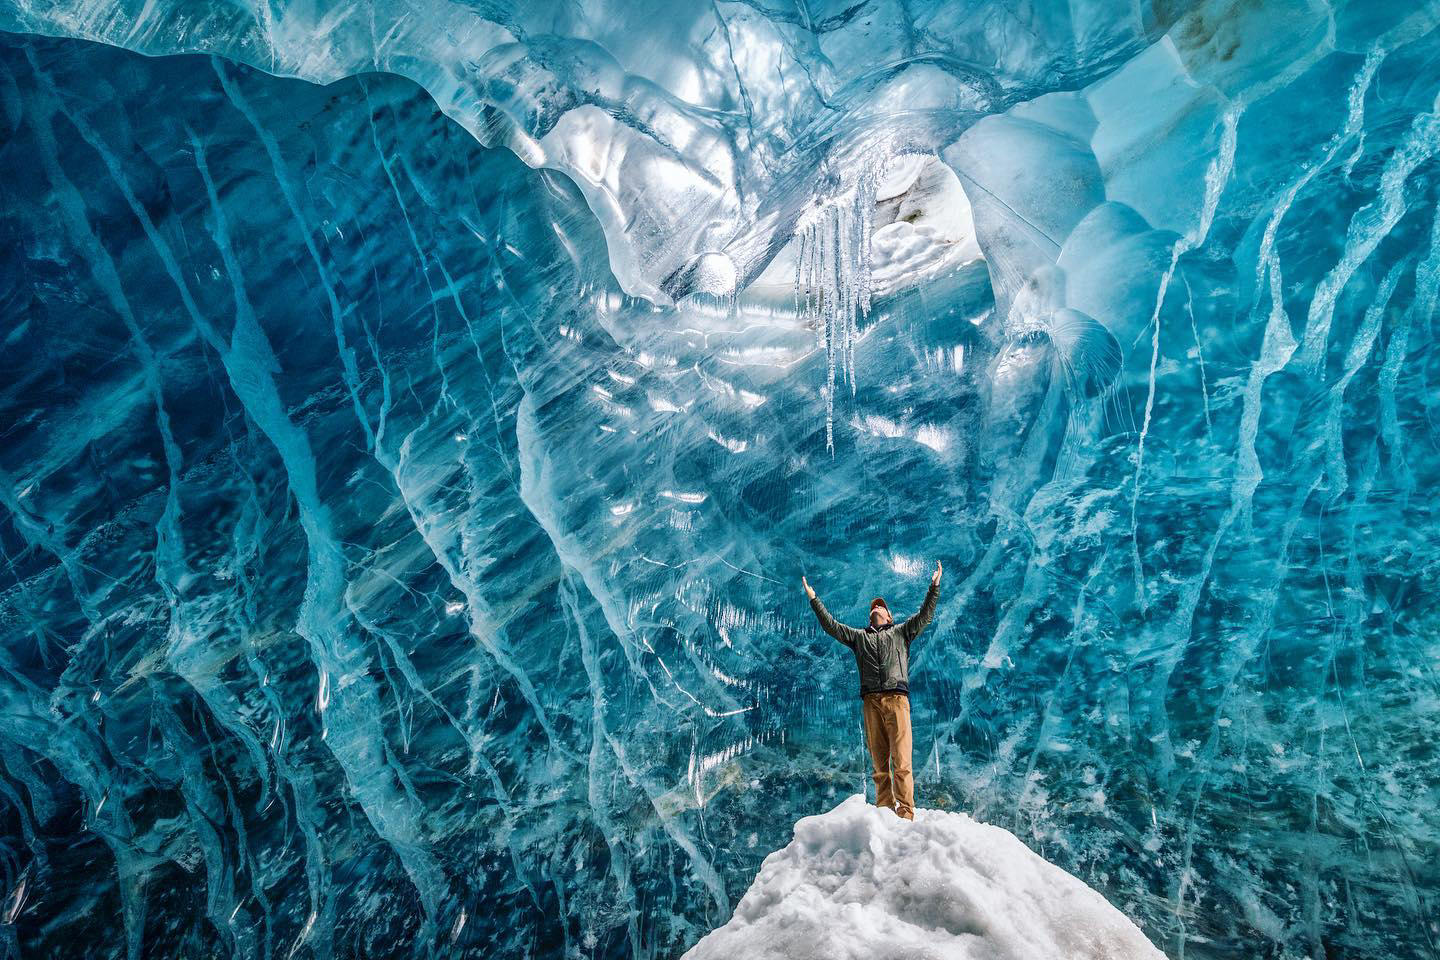 image  1 Paul Nicklen - I give thanks for nature everyday